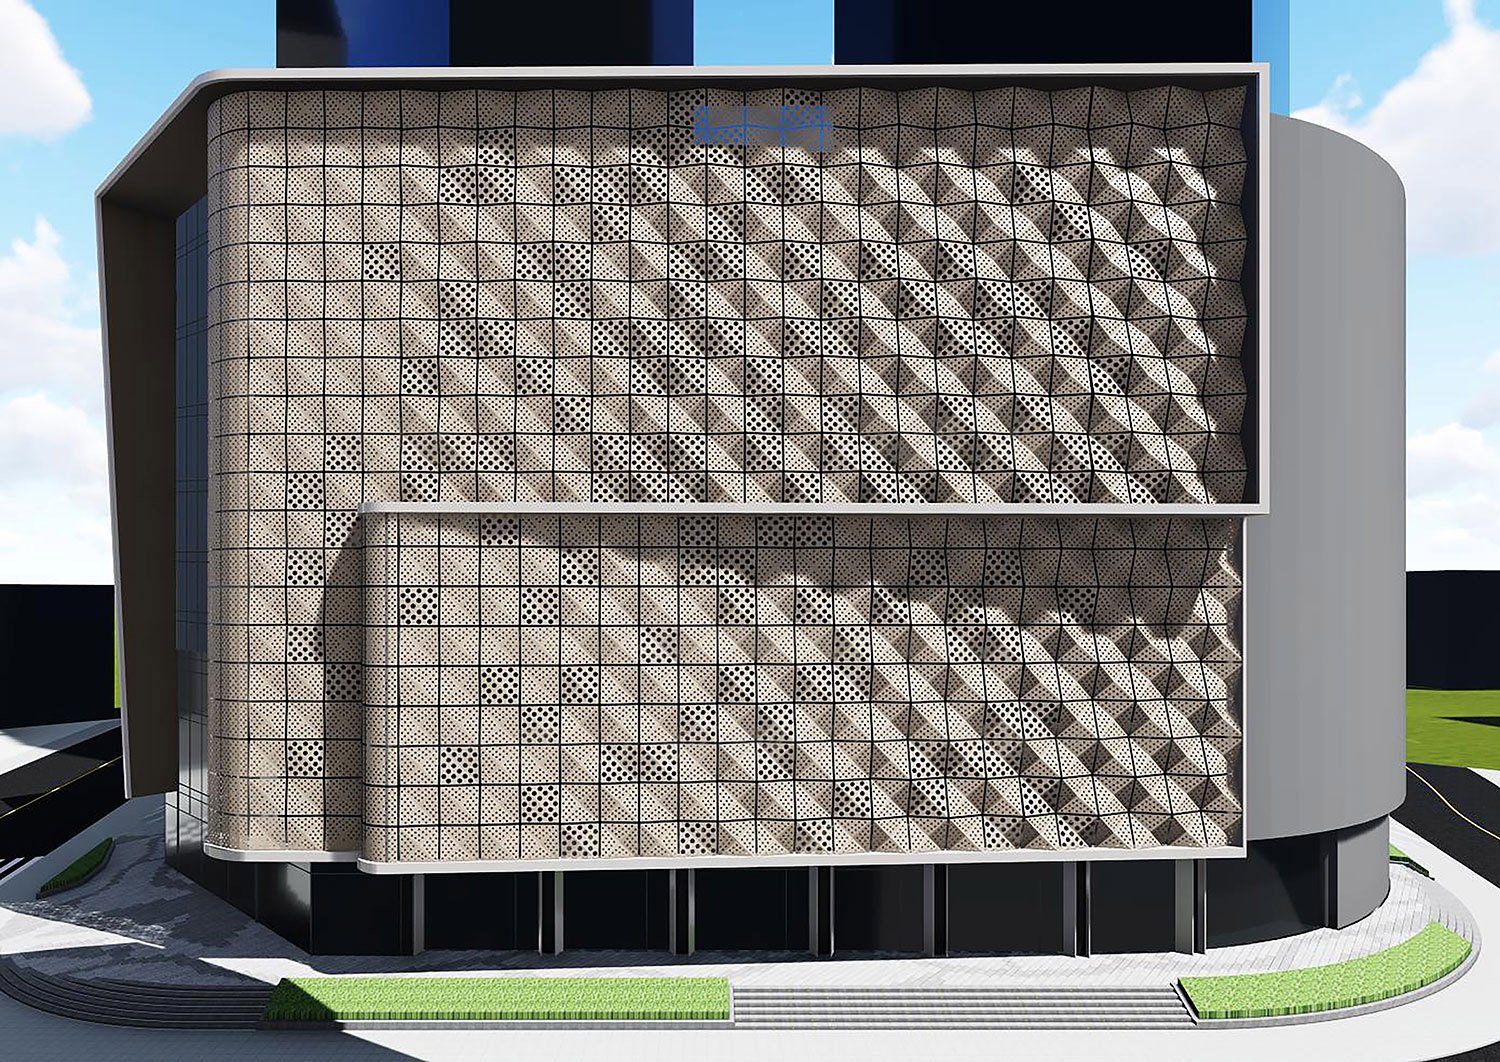 Analysis of new exterior textures formed by perforated panels | Shanghai PTArchitects